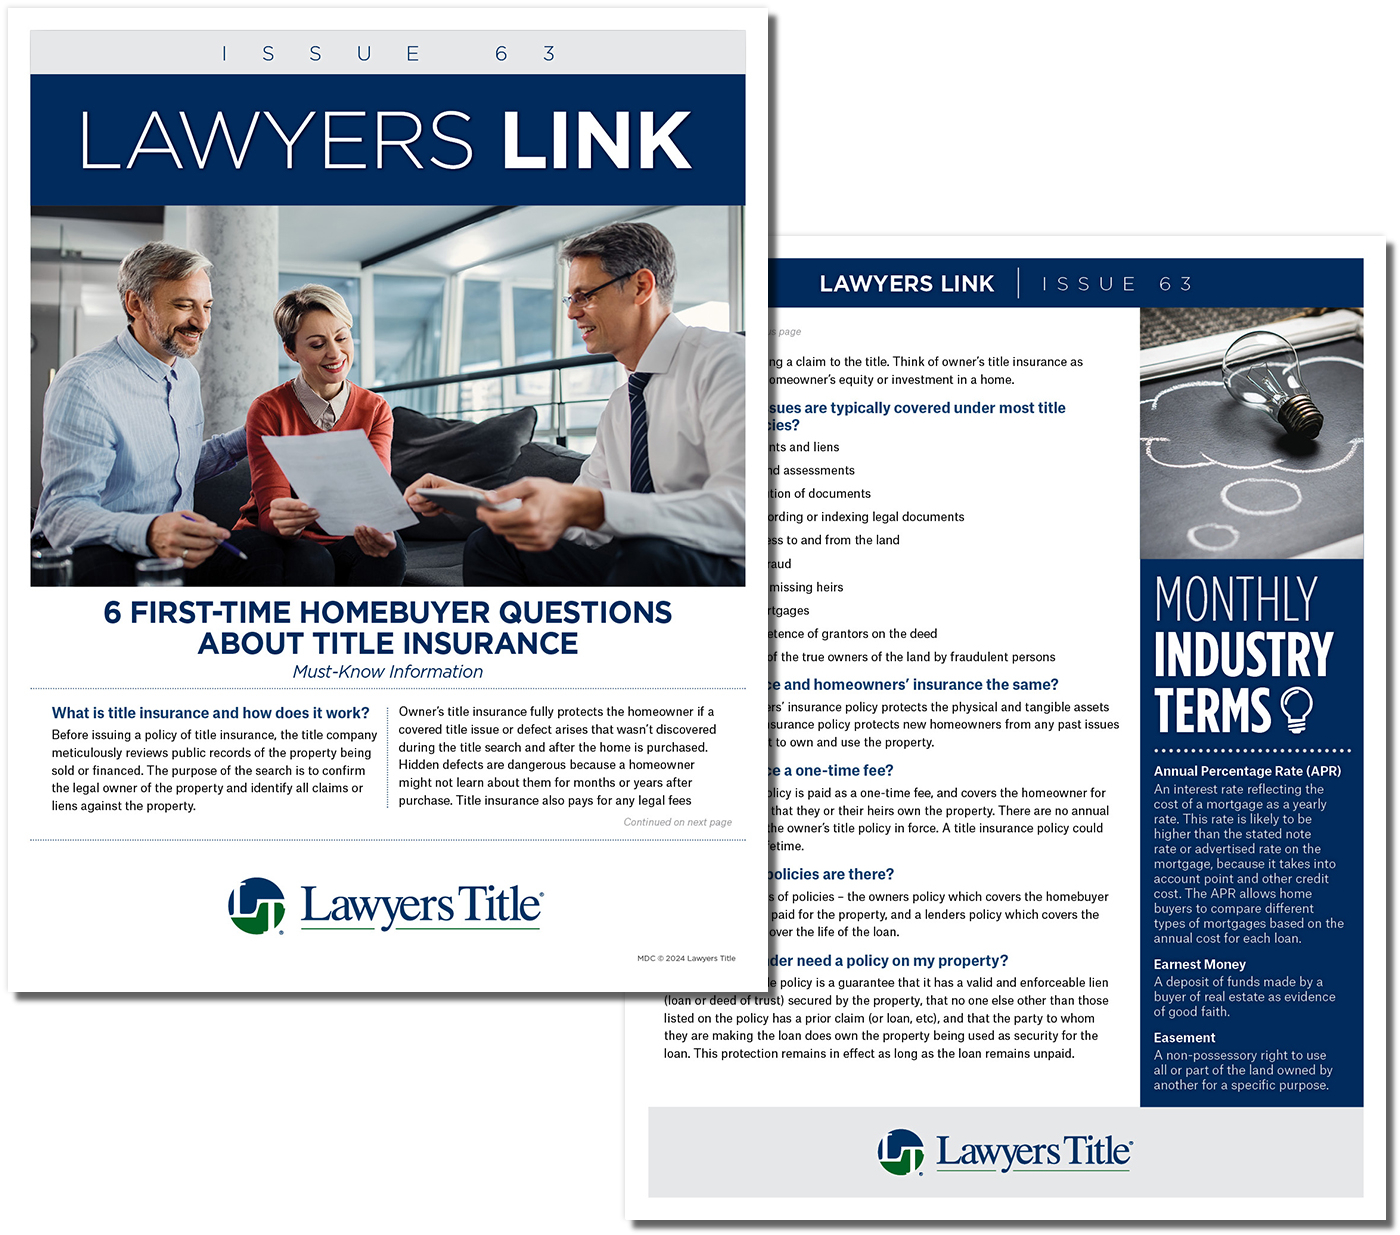 Lawyers Link